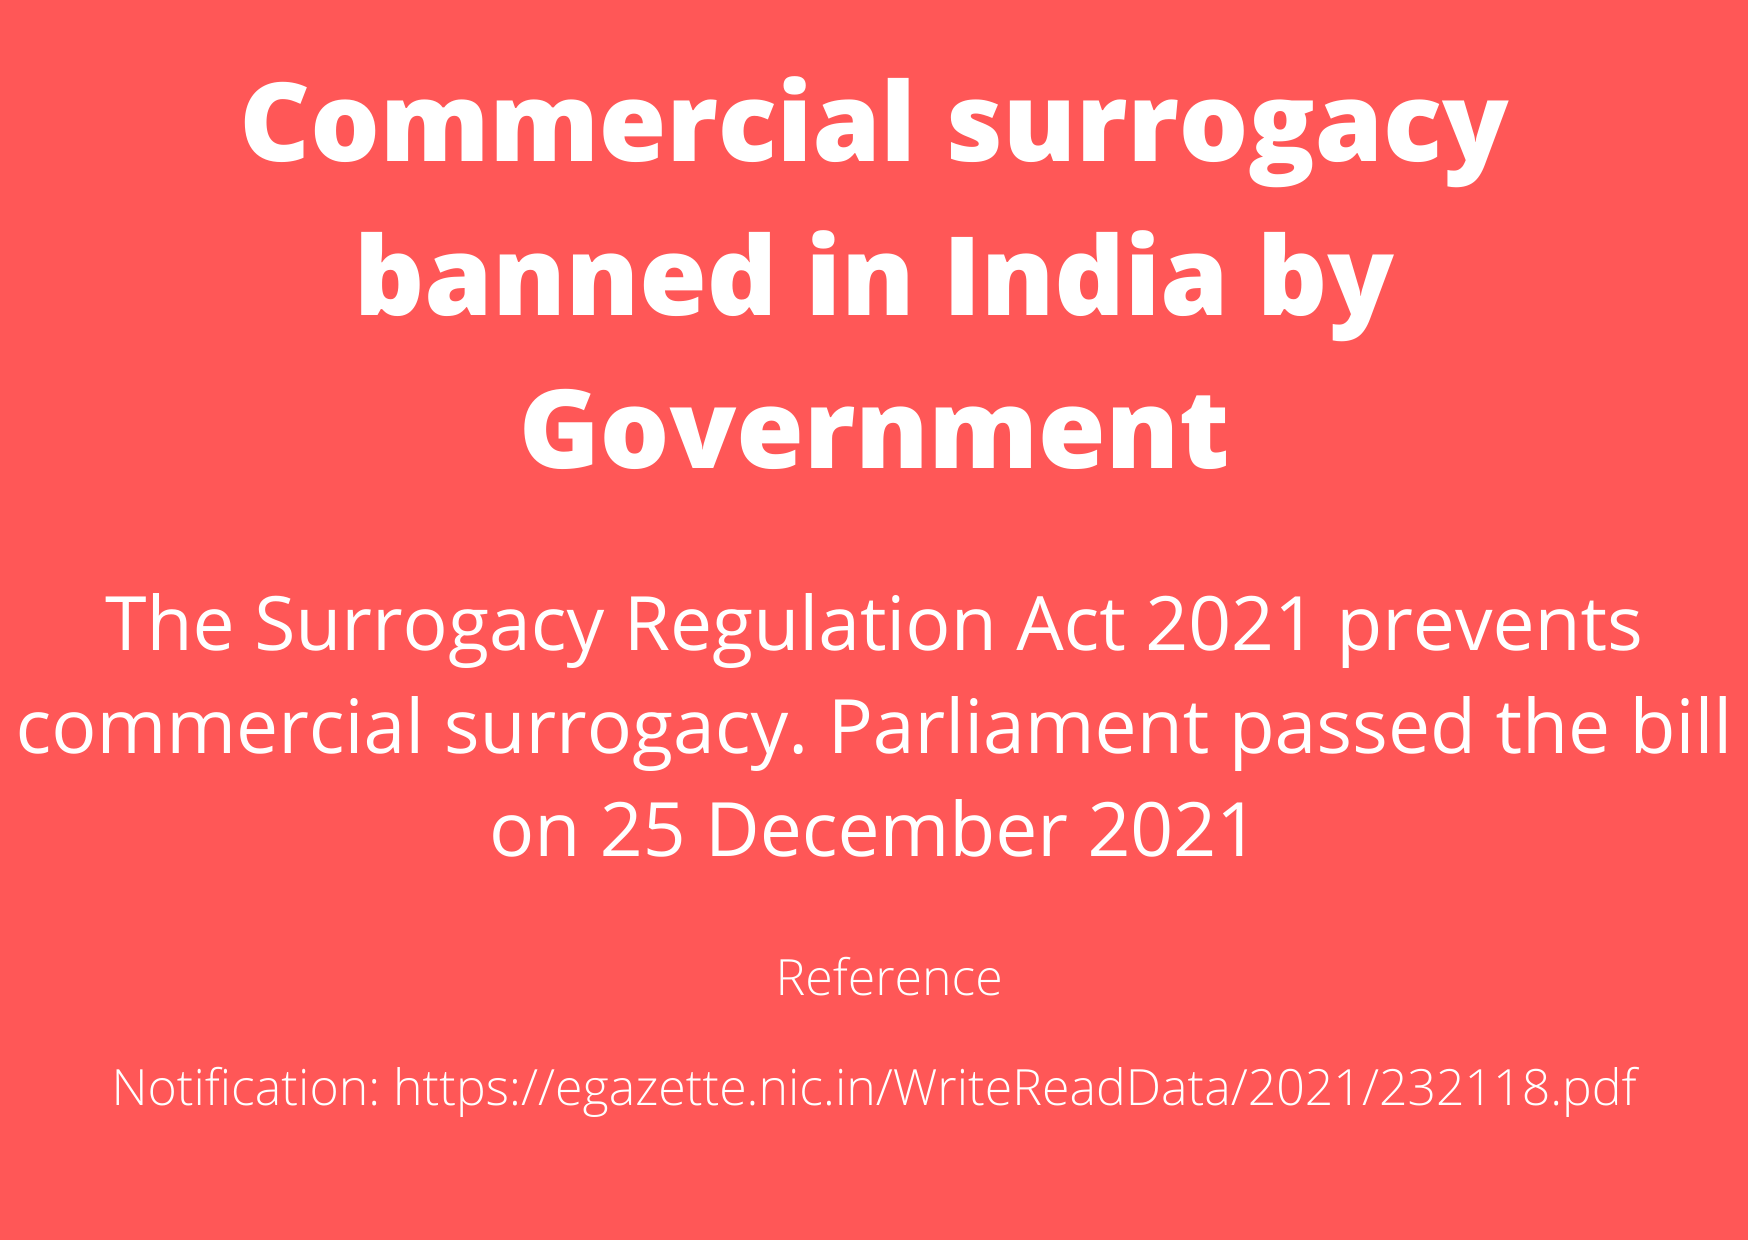 Commercial surrogacy is banned completely in India